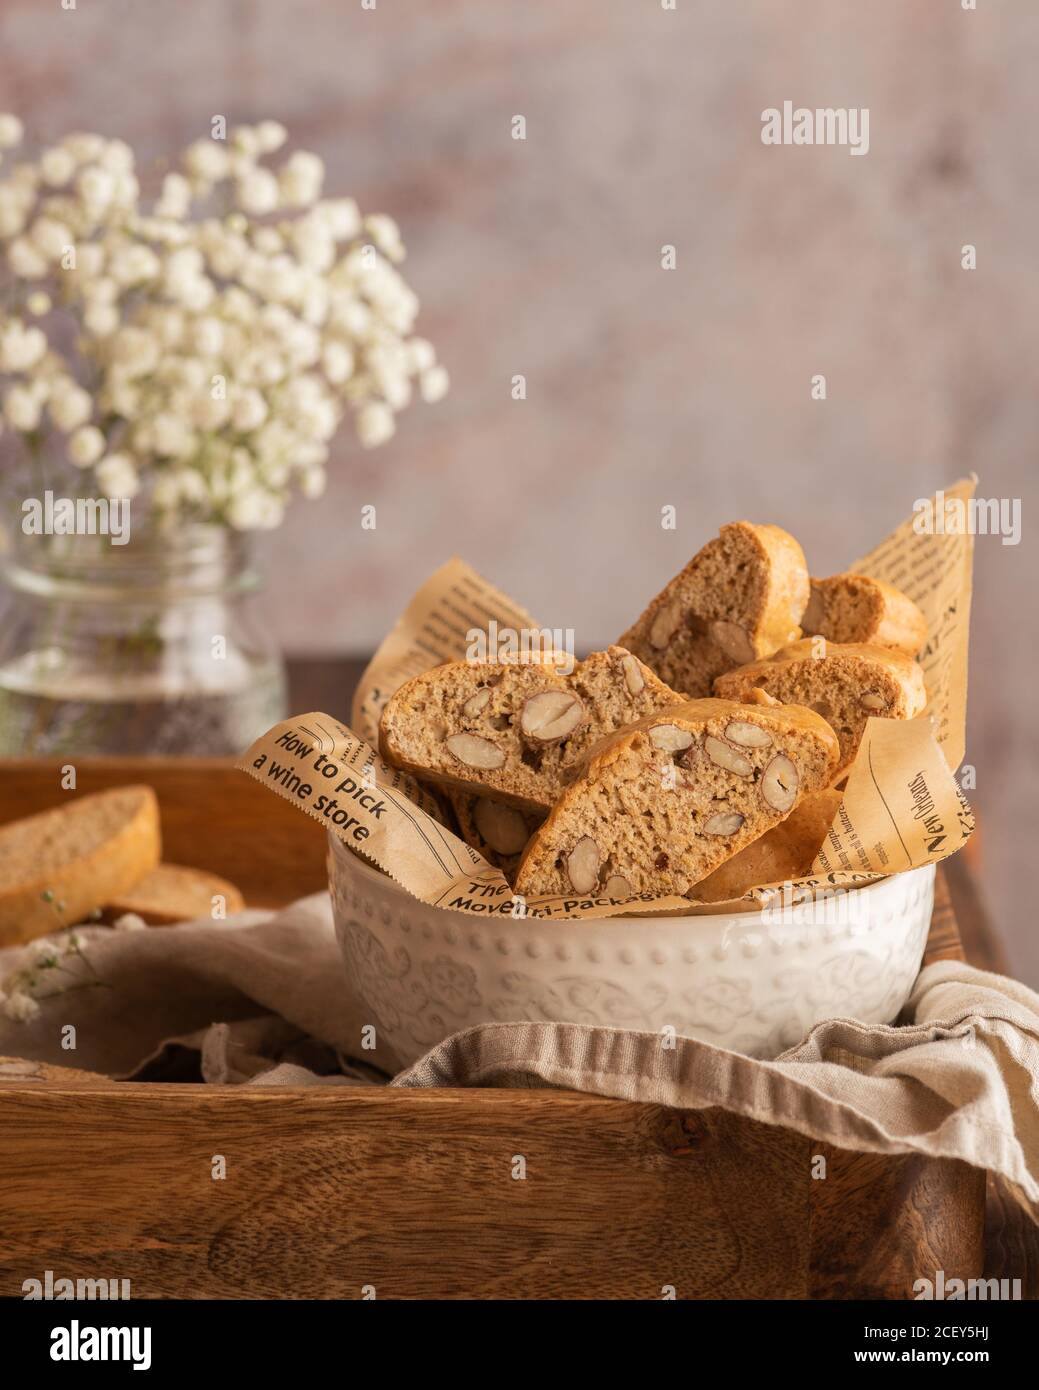 Bowl with typical Catalan pastry carquinyolis with almonds served on wooden table with bouquet of flowers Stock Photo